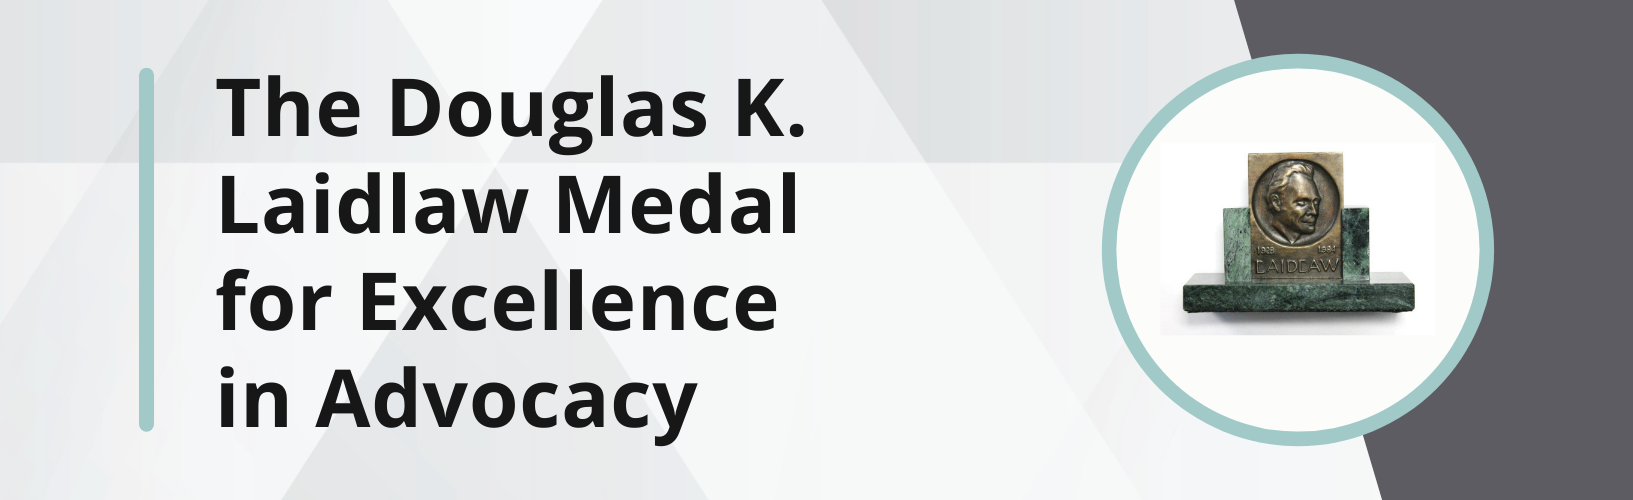 The Douglas K. Laidlaw Medal for Excellence in Advocacy